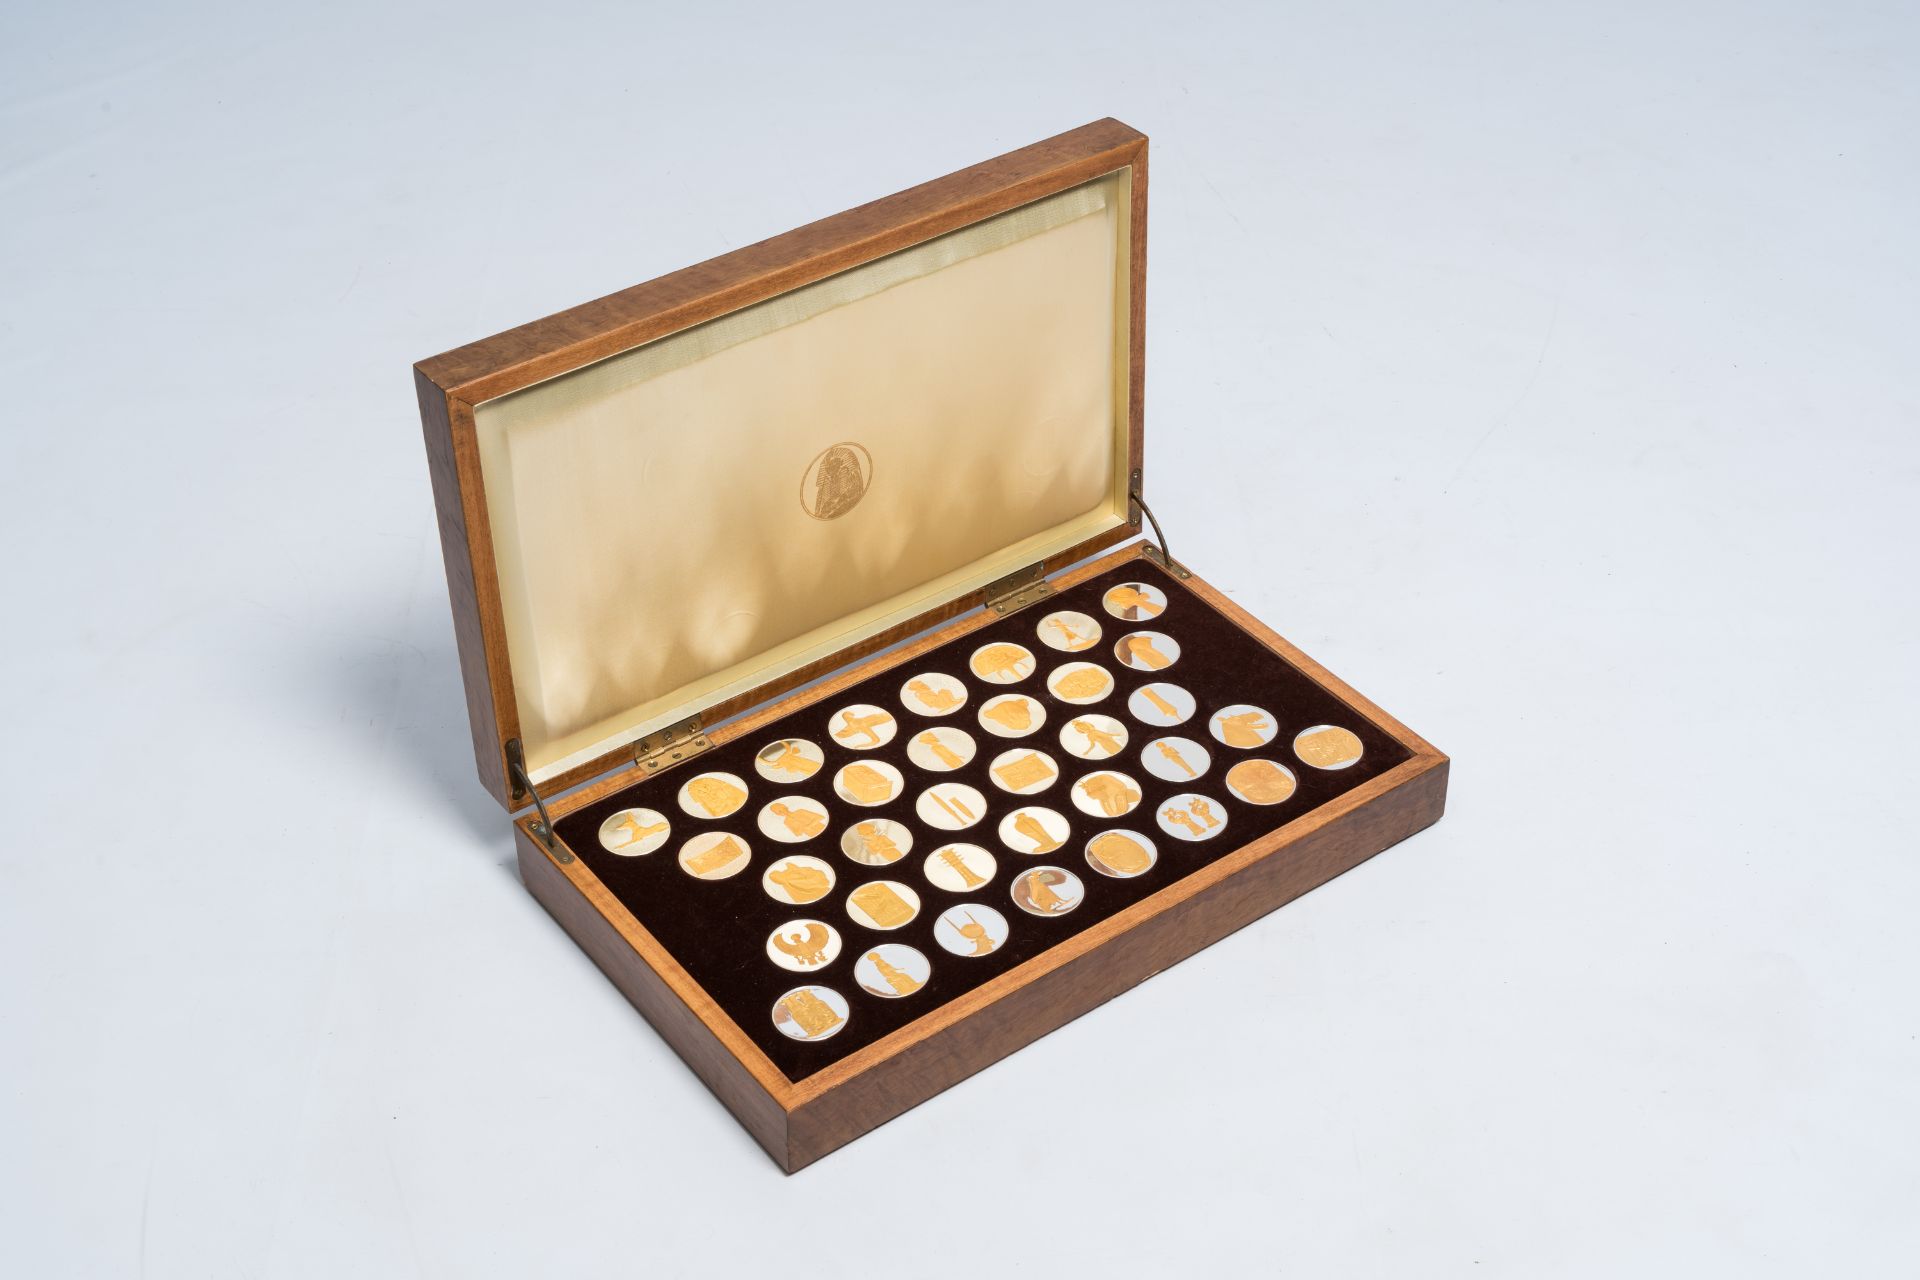 The Golden Treasures of Ancient Egypt', 36 gilt silver coins in the original wood box, edition Frank